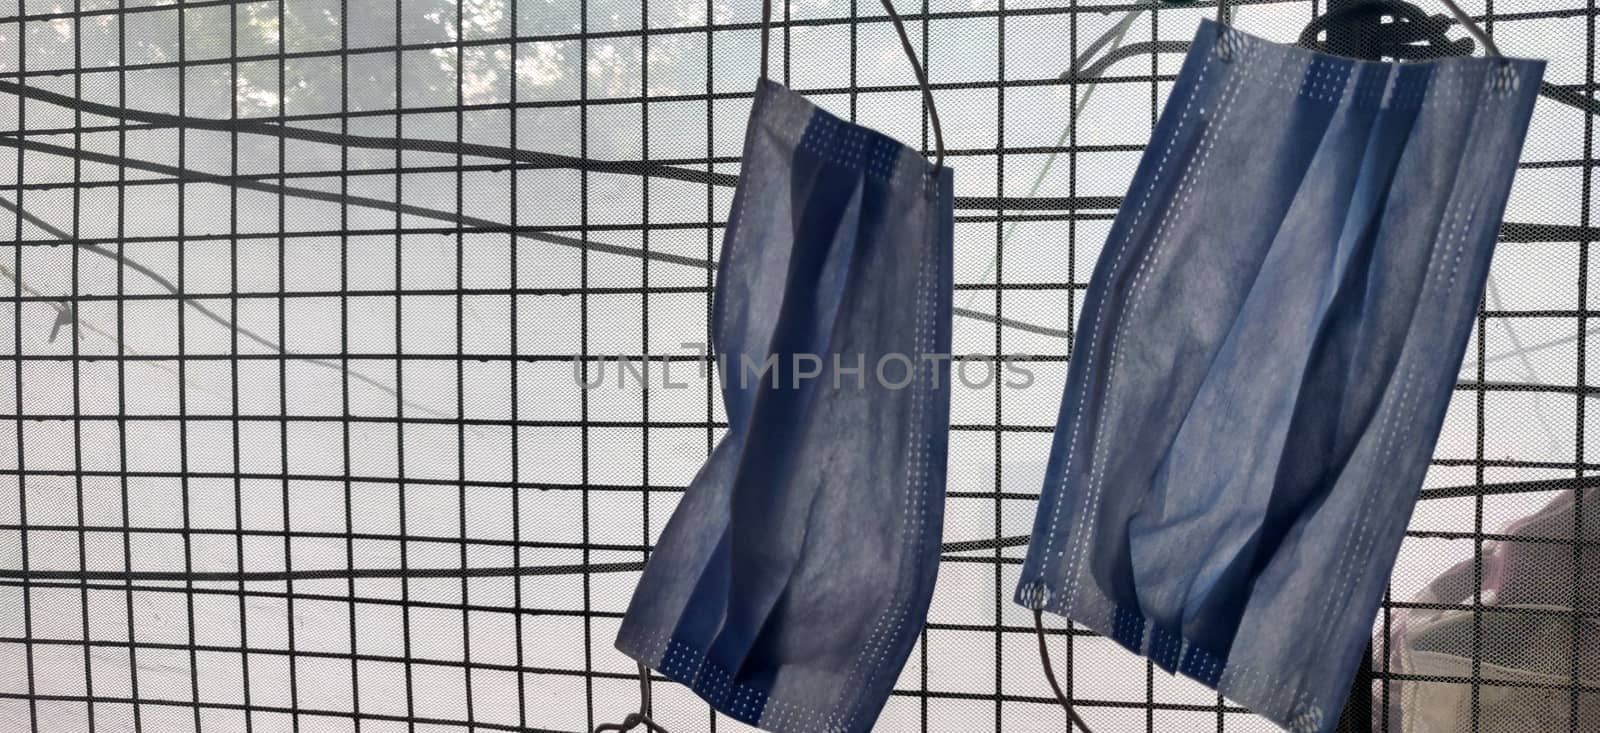 Two surgical mask hanging by clothes pin near a grilled window during lock down in India